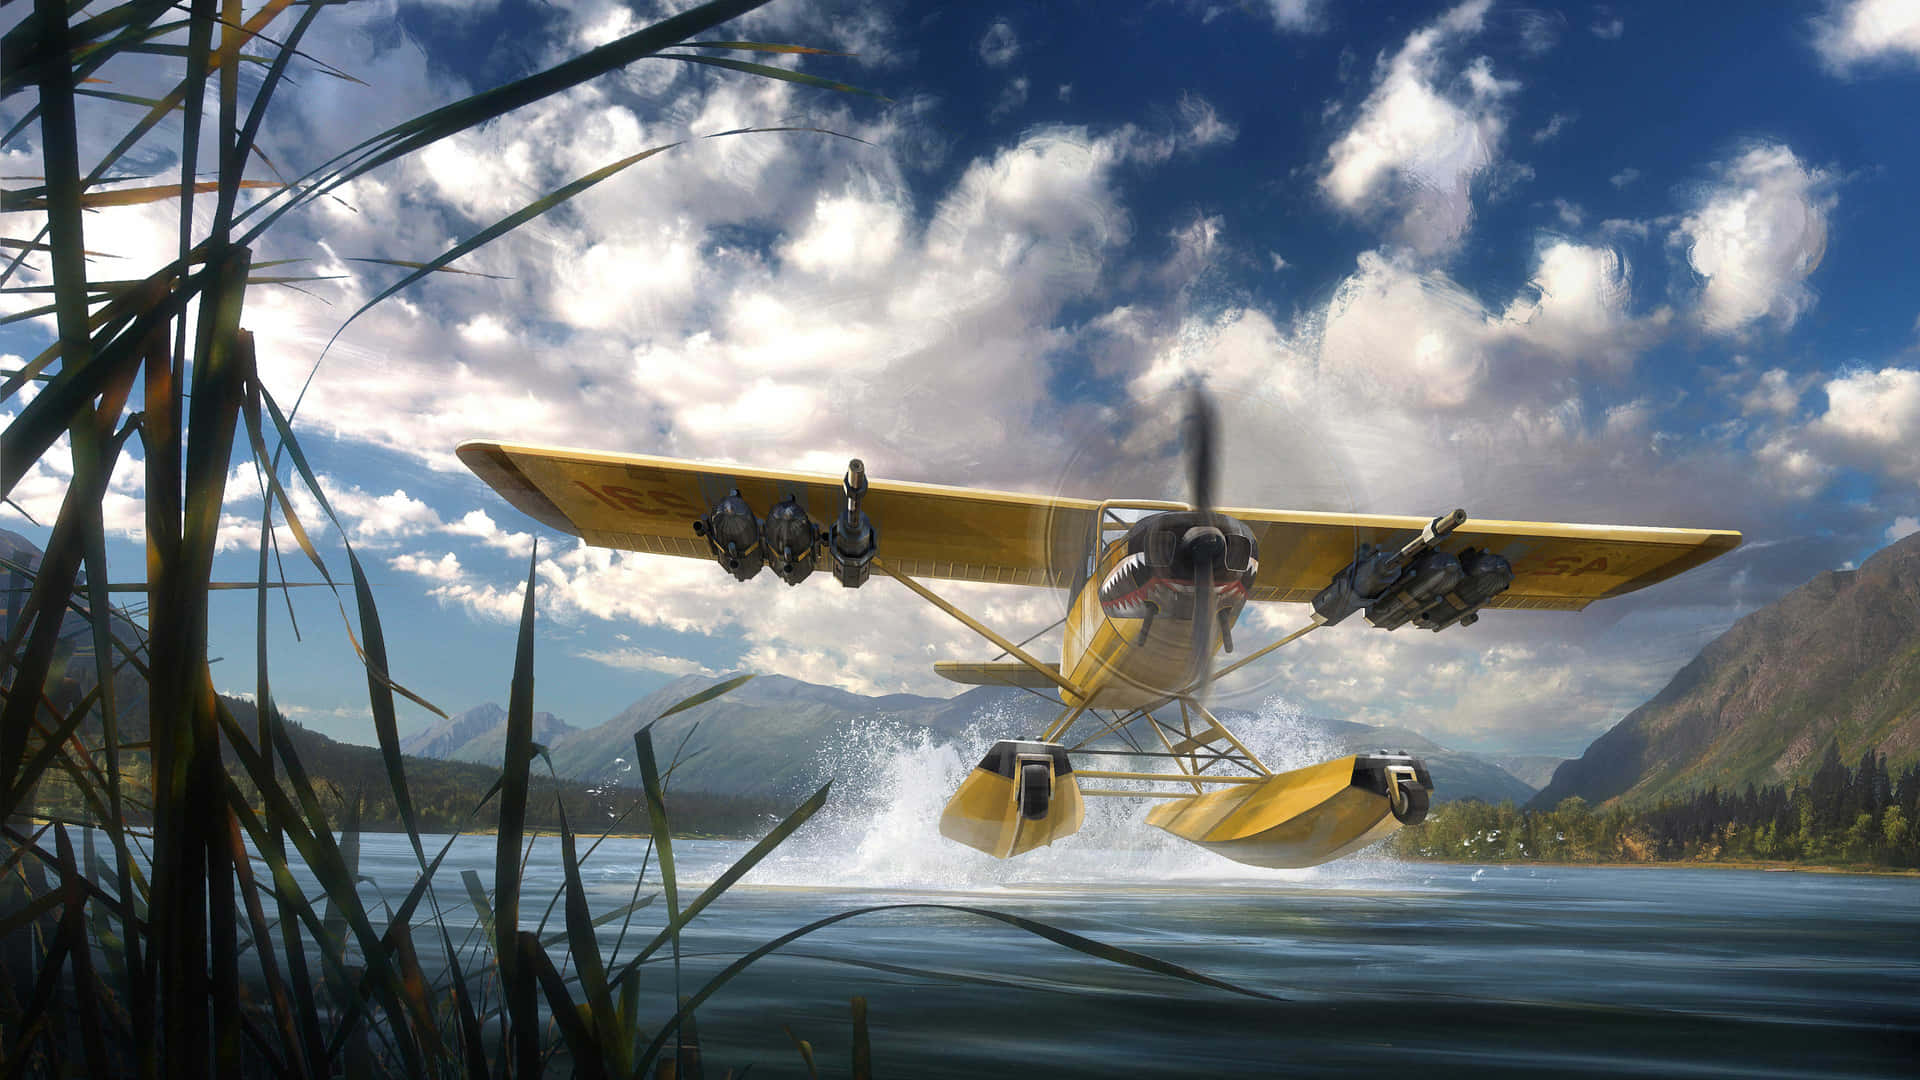 A Yellow Plane Flying Over Water